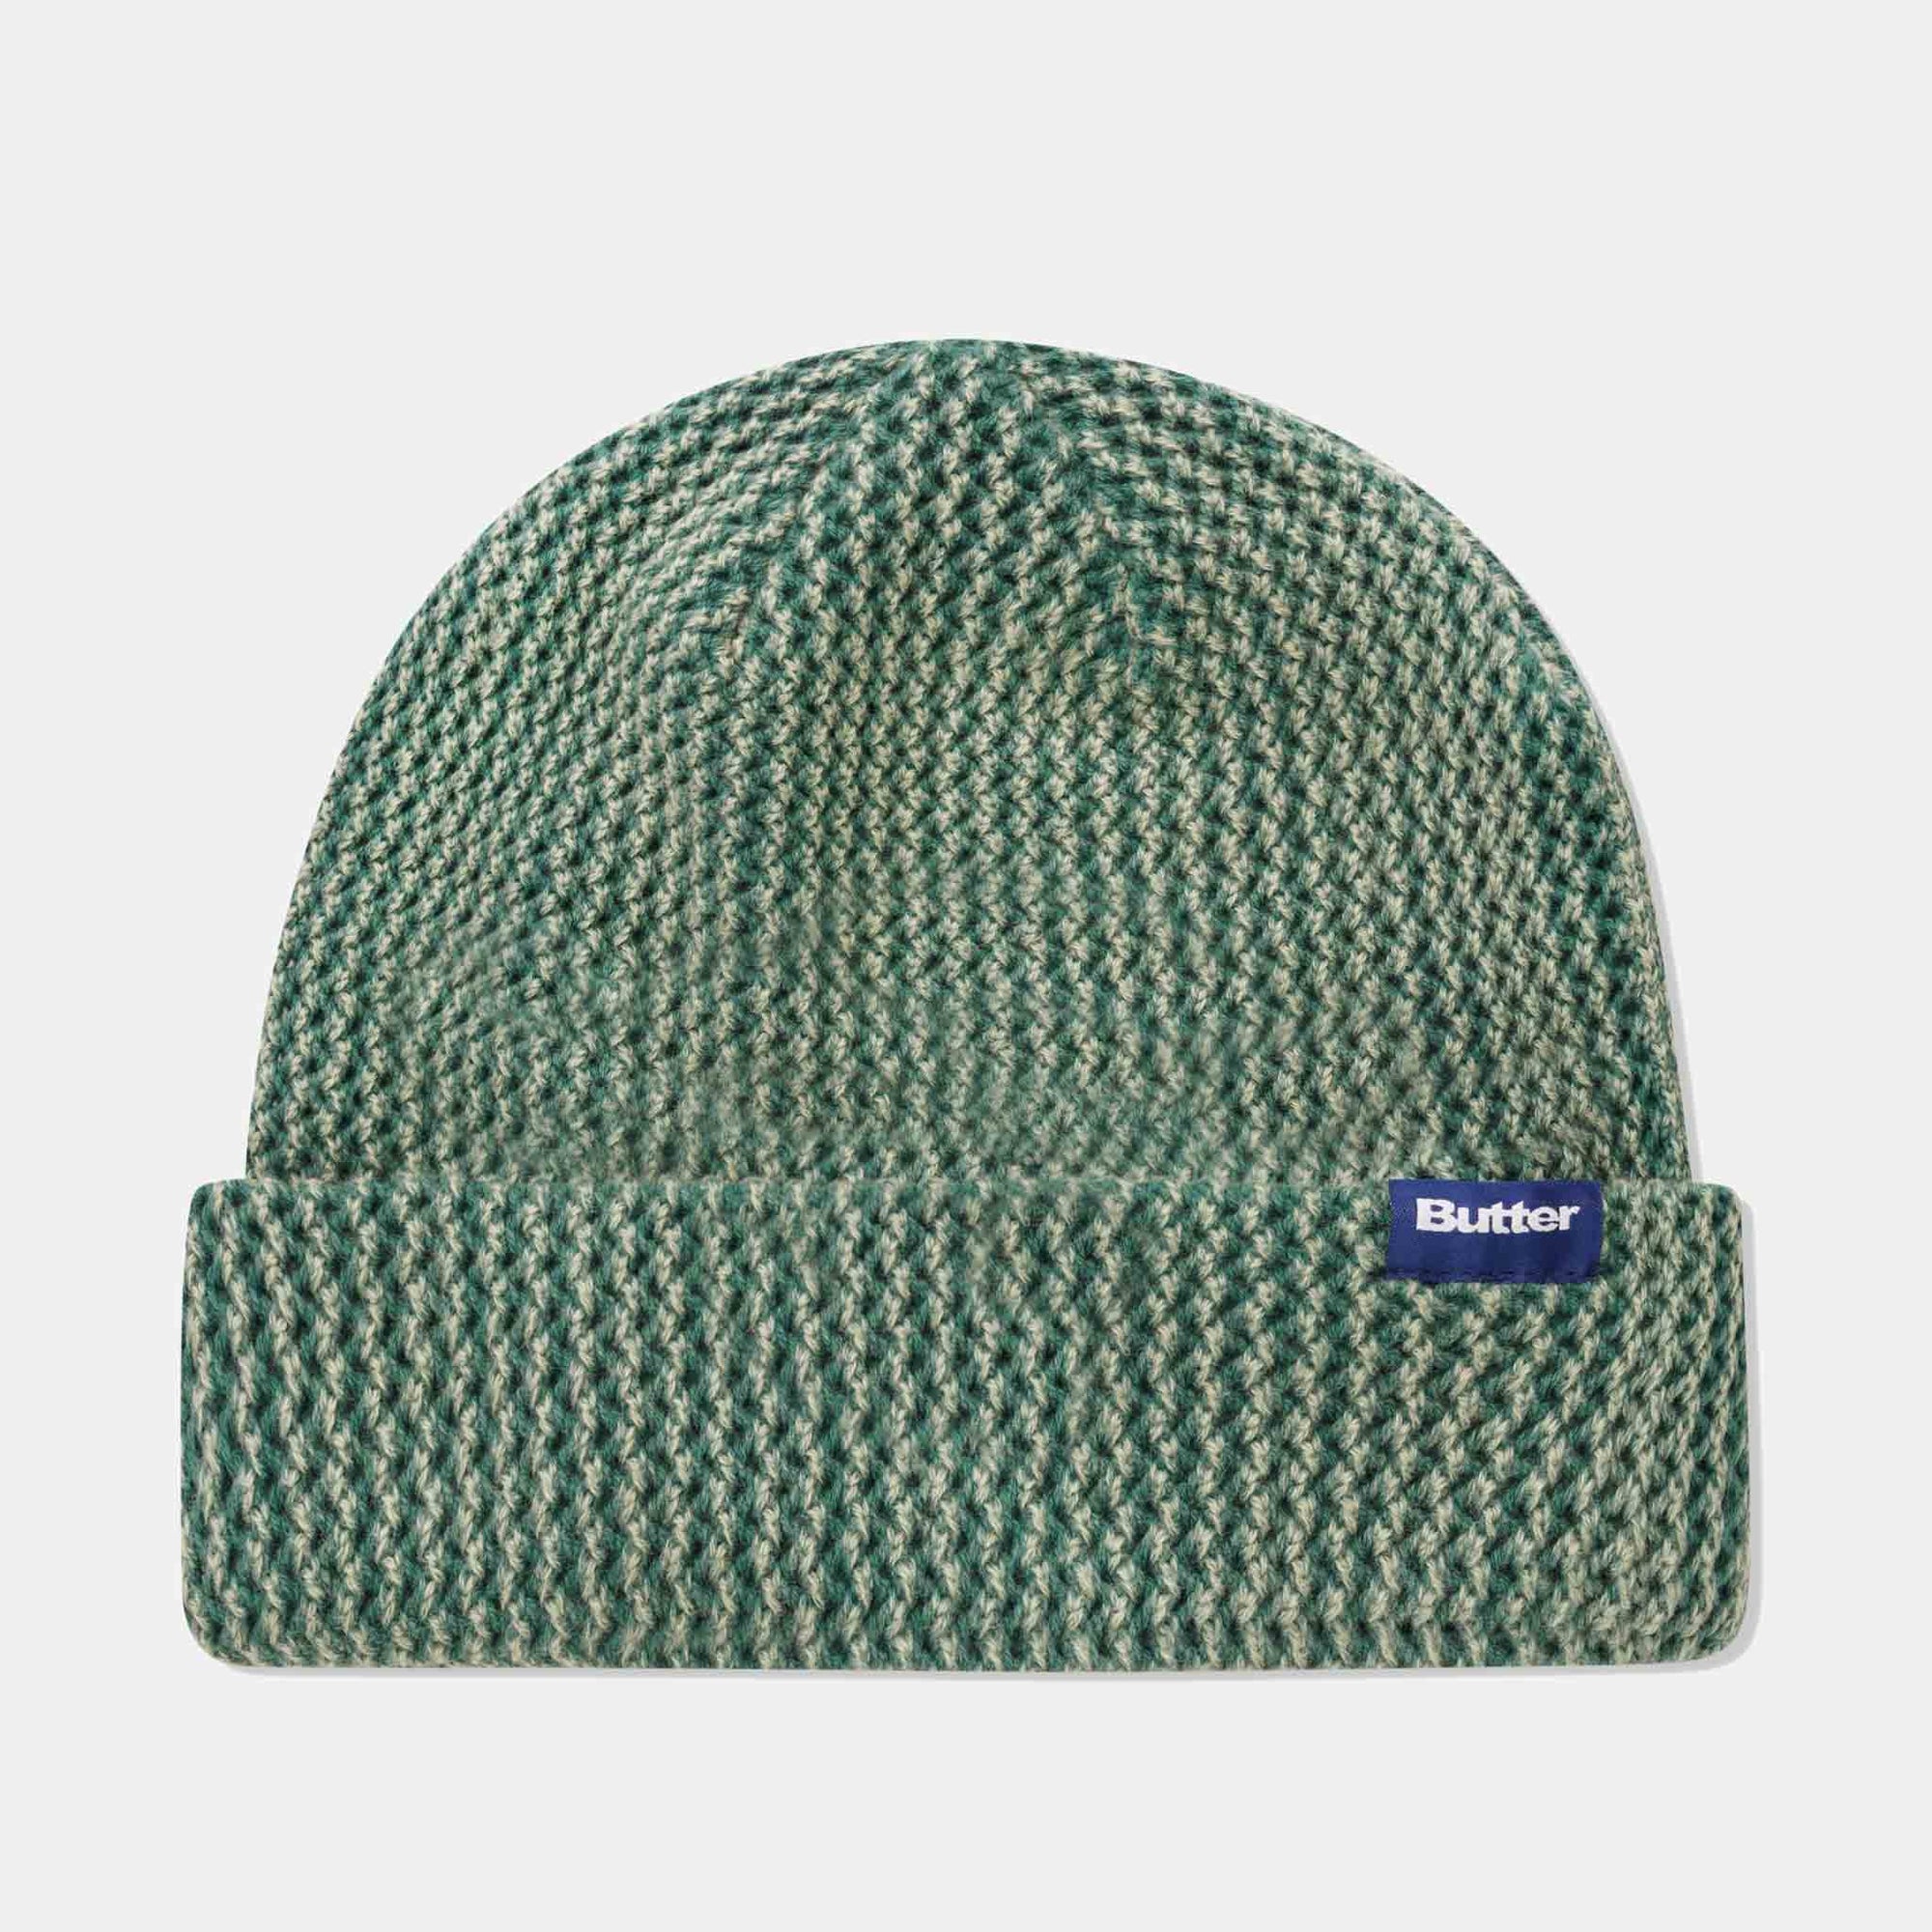 Butter Goods - Dyed Beanie - Washed Army